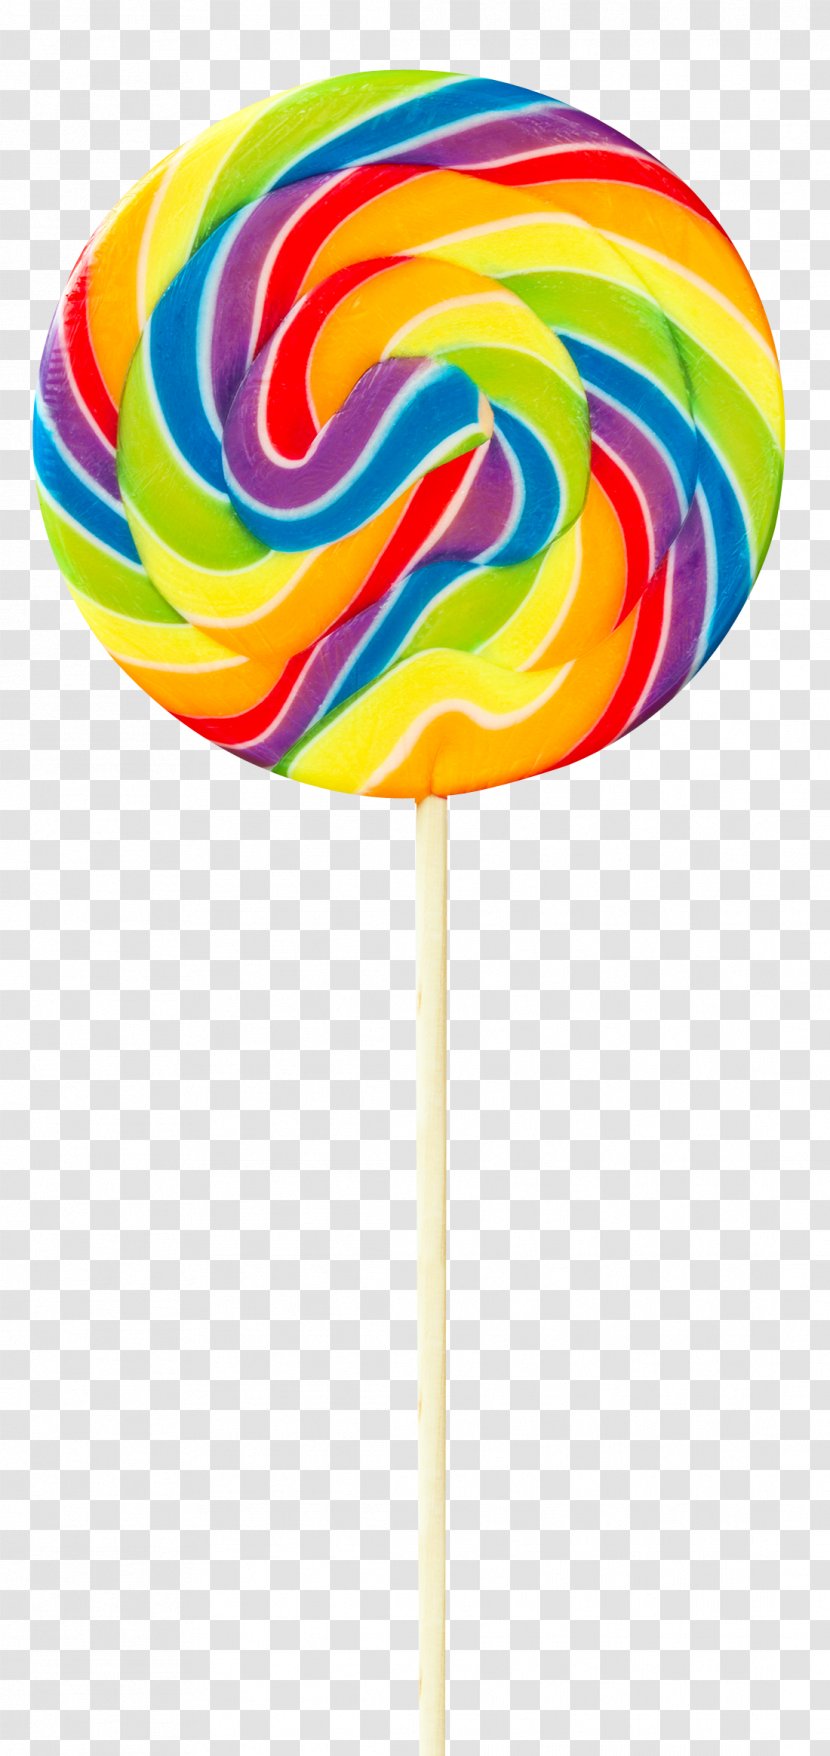 Android Lollipop Zamou015bu0107 Stick Candy - Confectionery - Swirl Transparent PNG